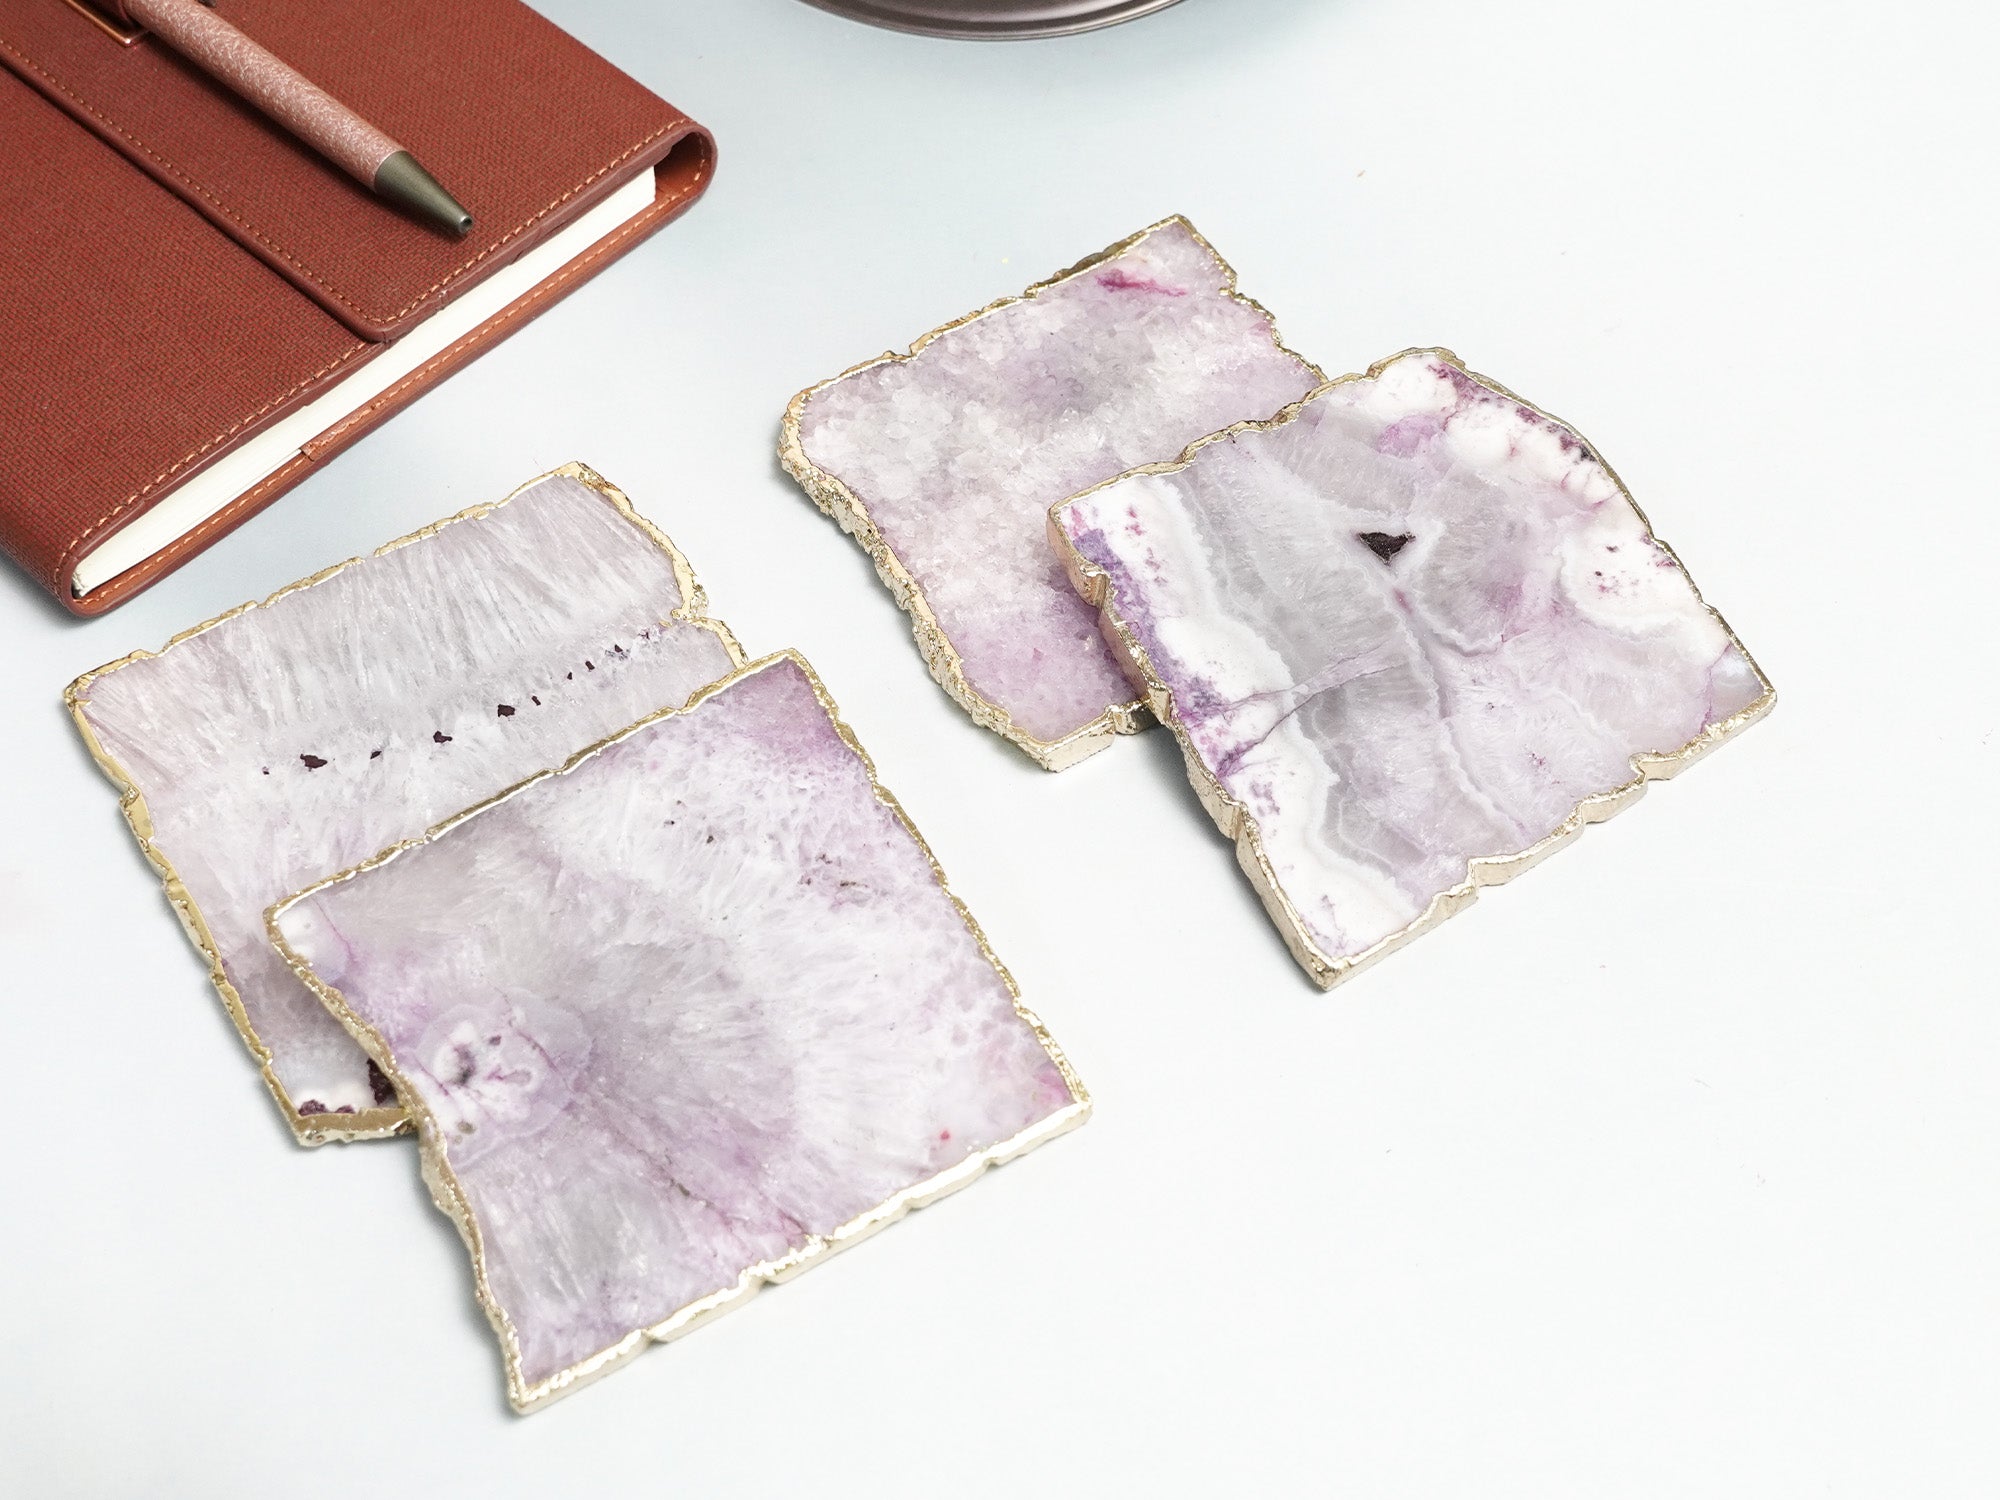 Guatemala BIBELOT Agate Handcrafted Luxury Gold plated Coaster (Square, Lavender)